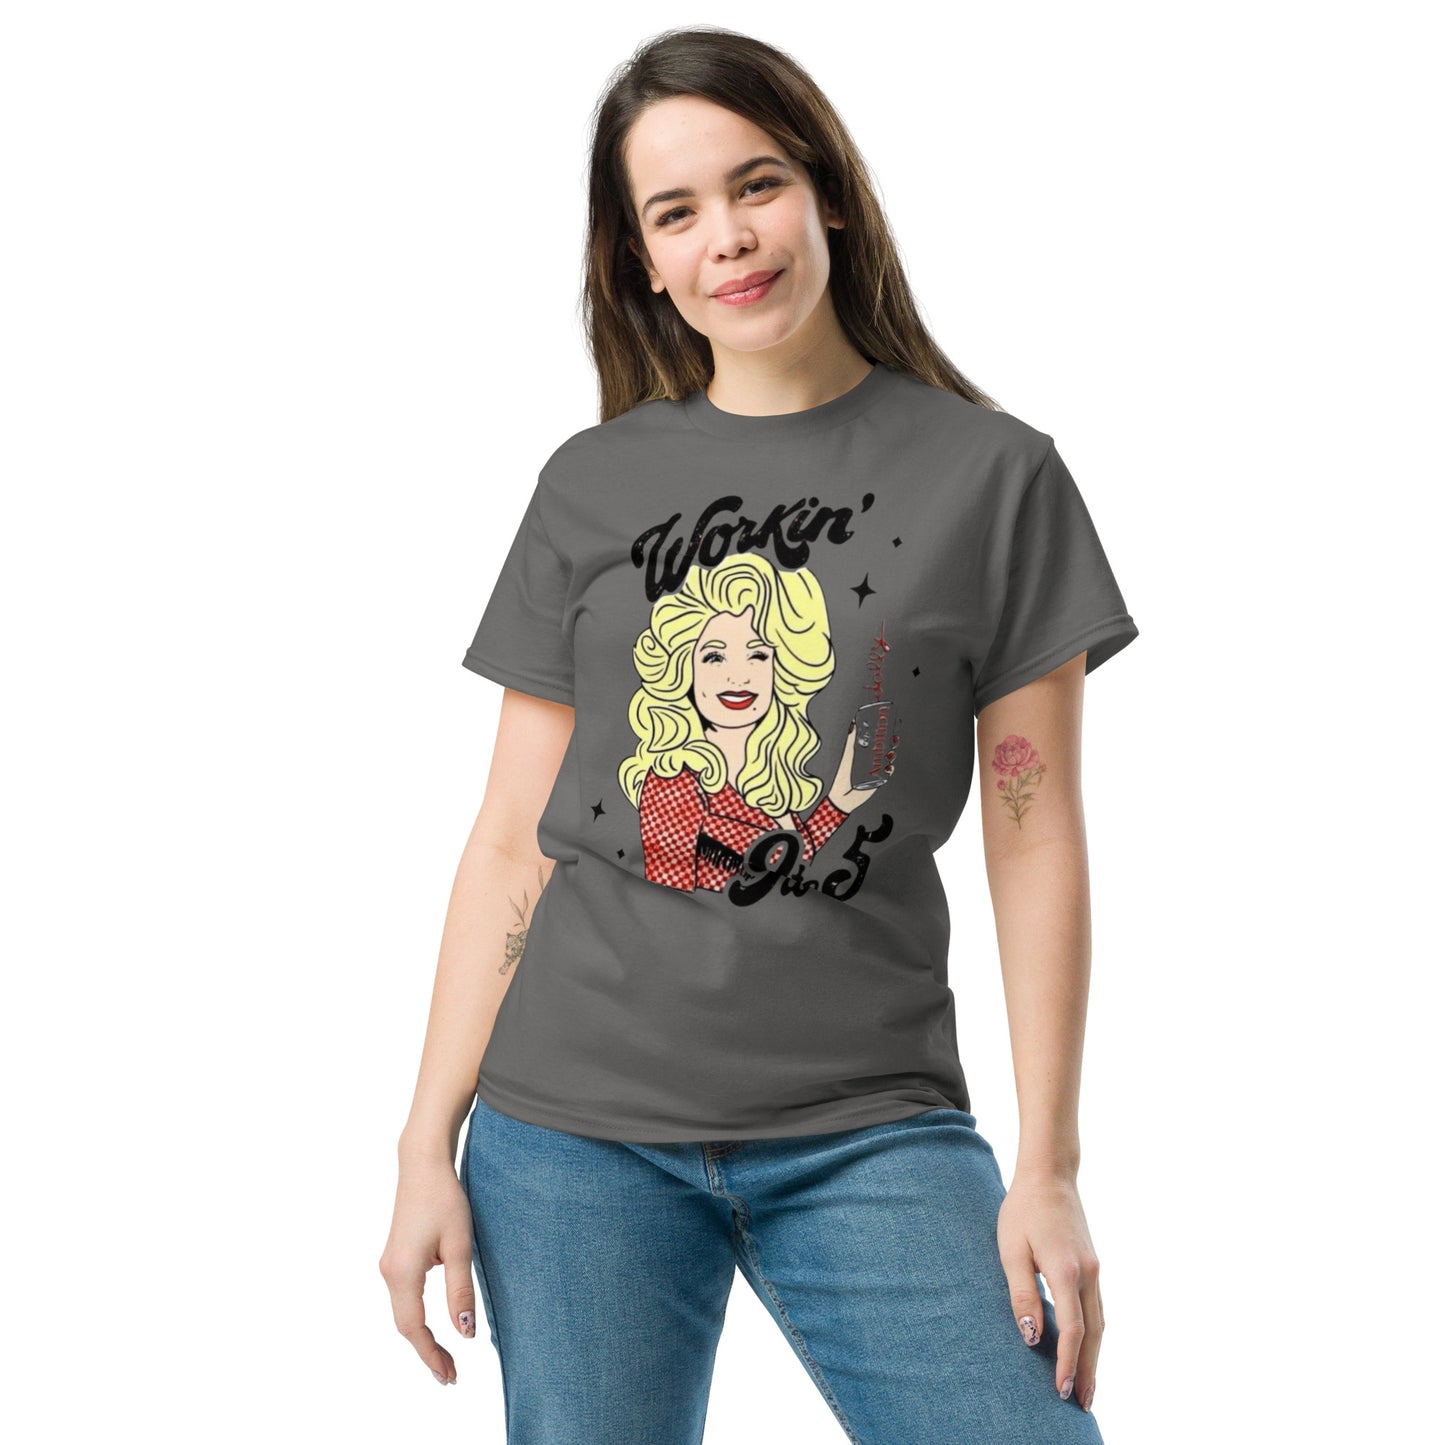 Workin' 9 to 5 - Inspired by Dolly Parton | Classic Country Tees - Classic Country Tees